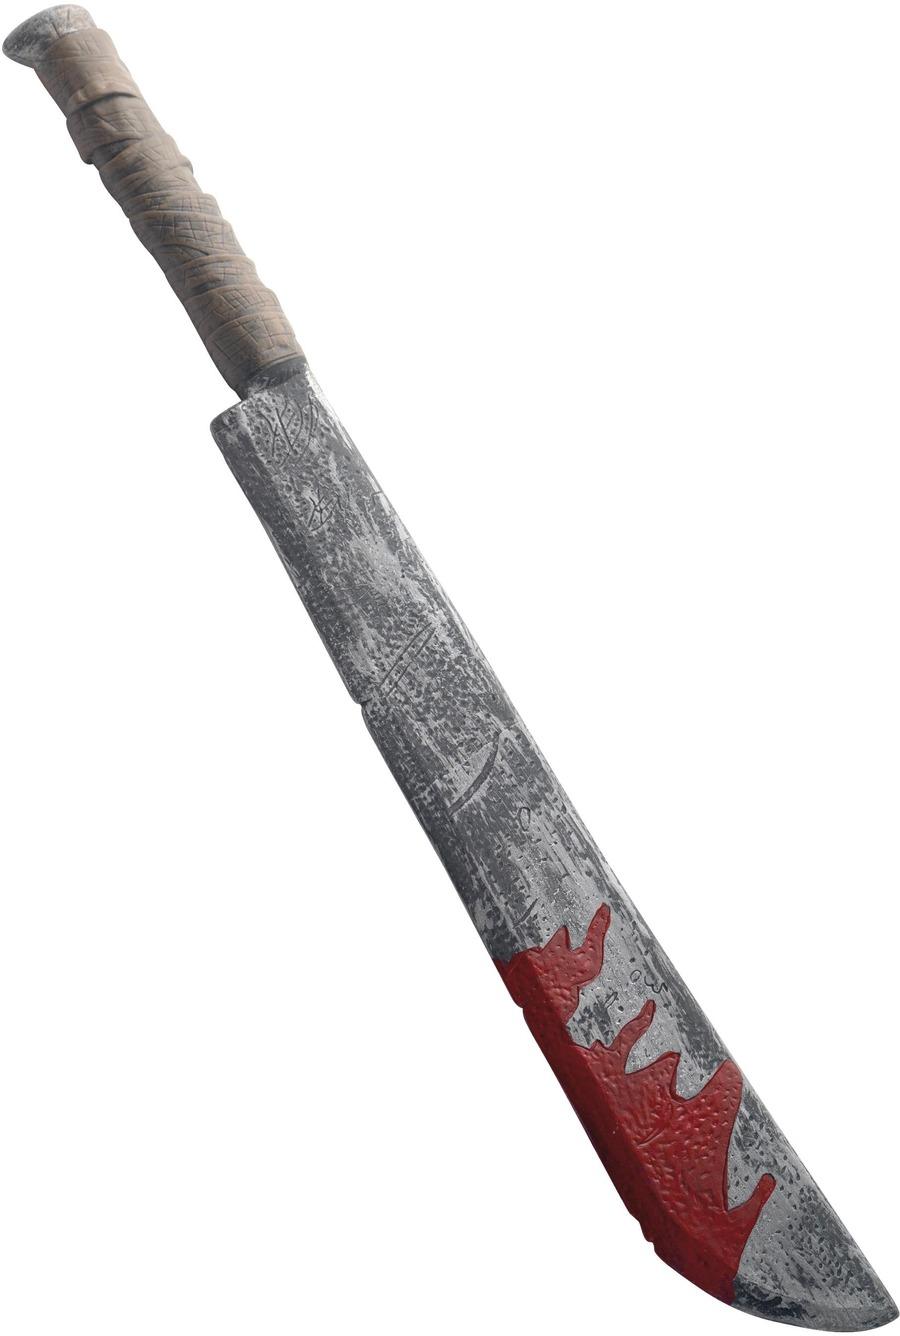 Blood Stained Chopper Knife